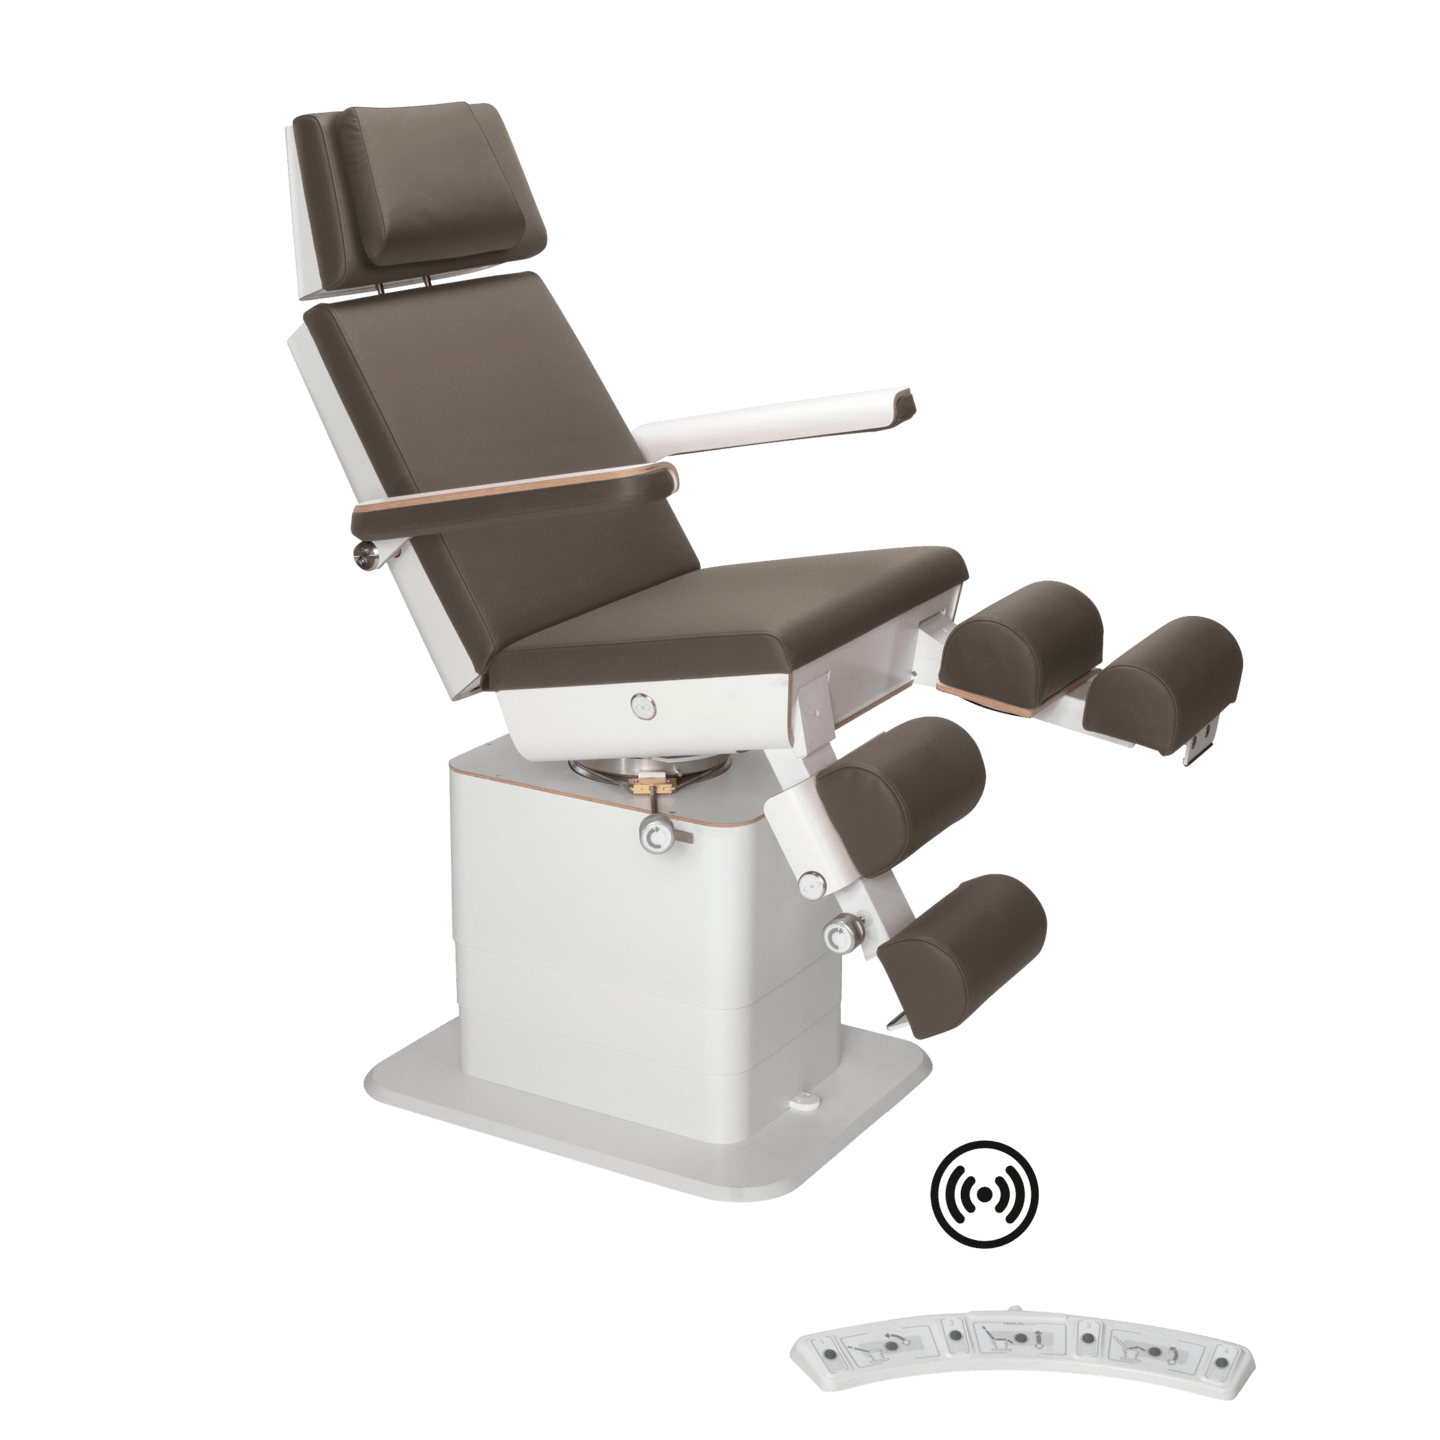 RUCK - MOON Podiatry Chair/Couch with motorised leg sections and patient control in espresso